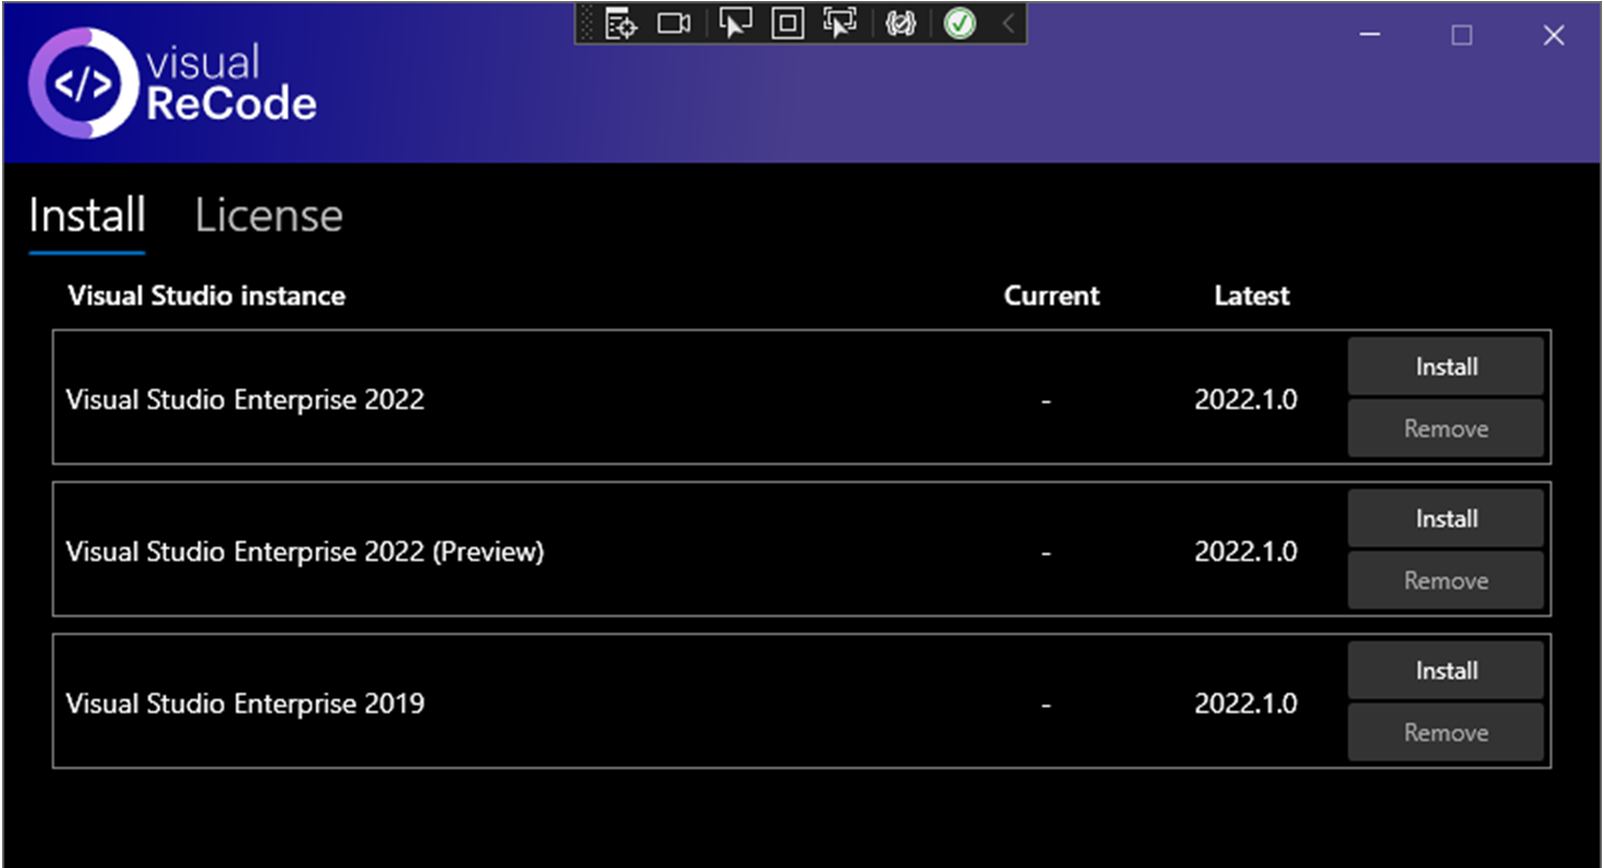 Screenshot of the Visual Recode Exentsion Manager, showing the VS 2019 and VS 2022 install options